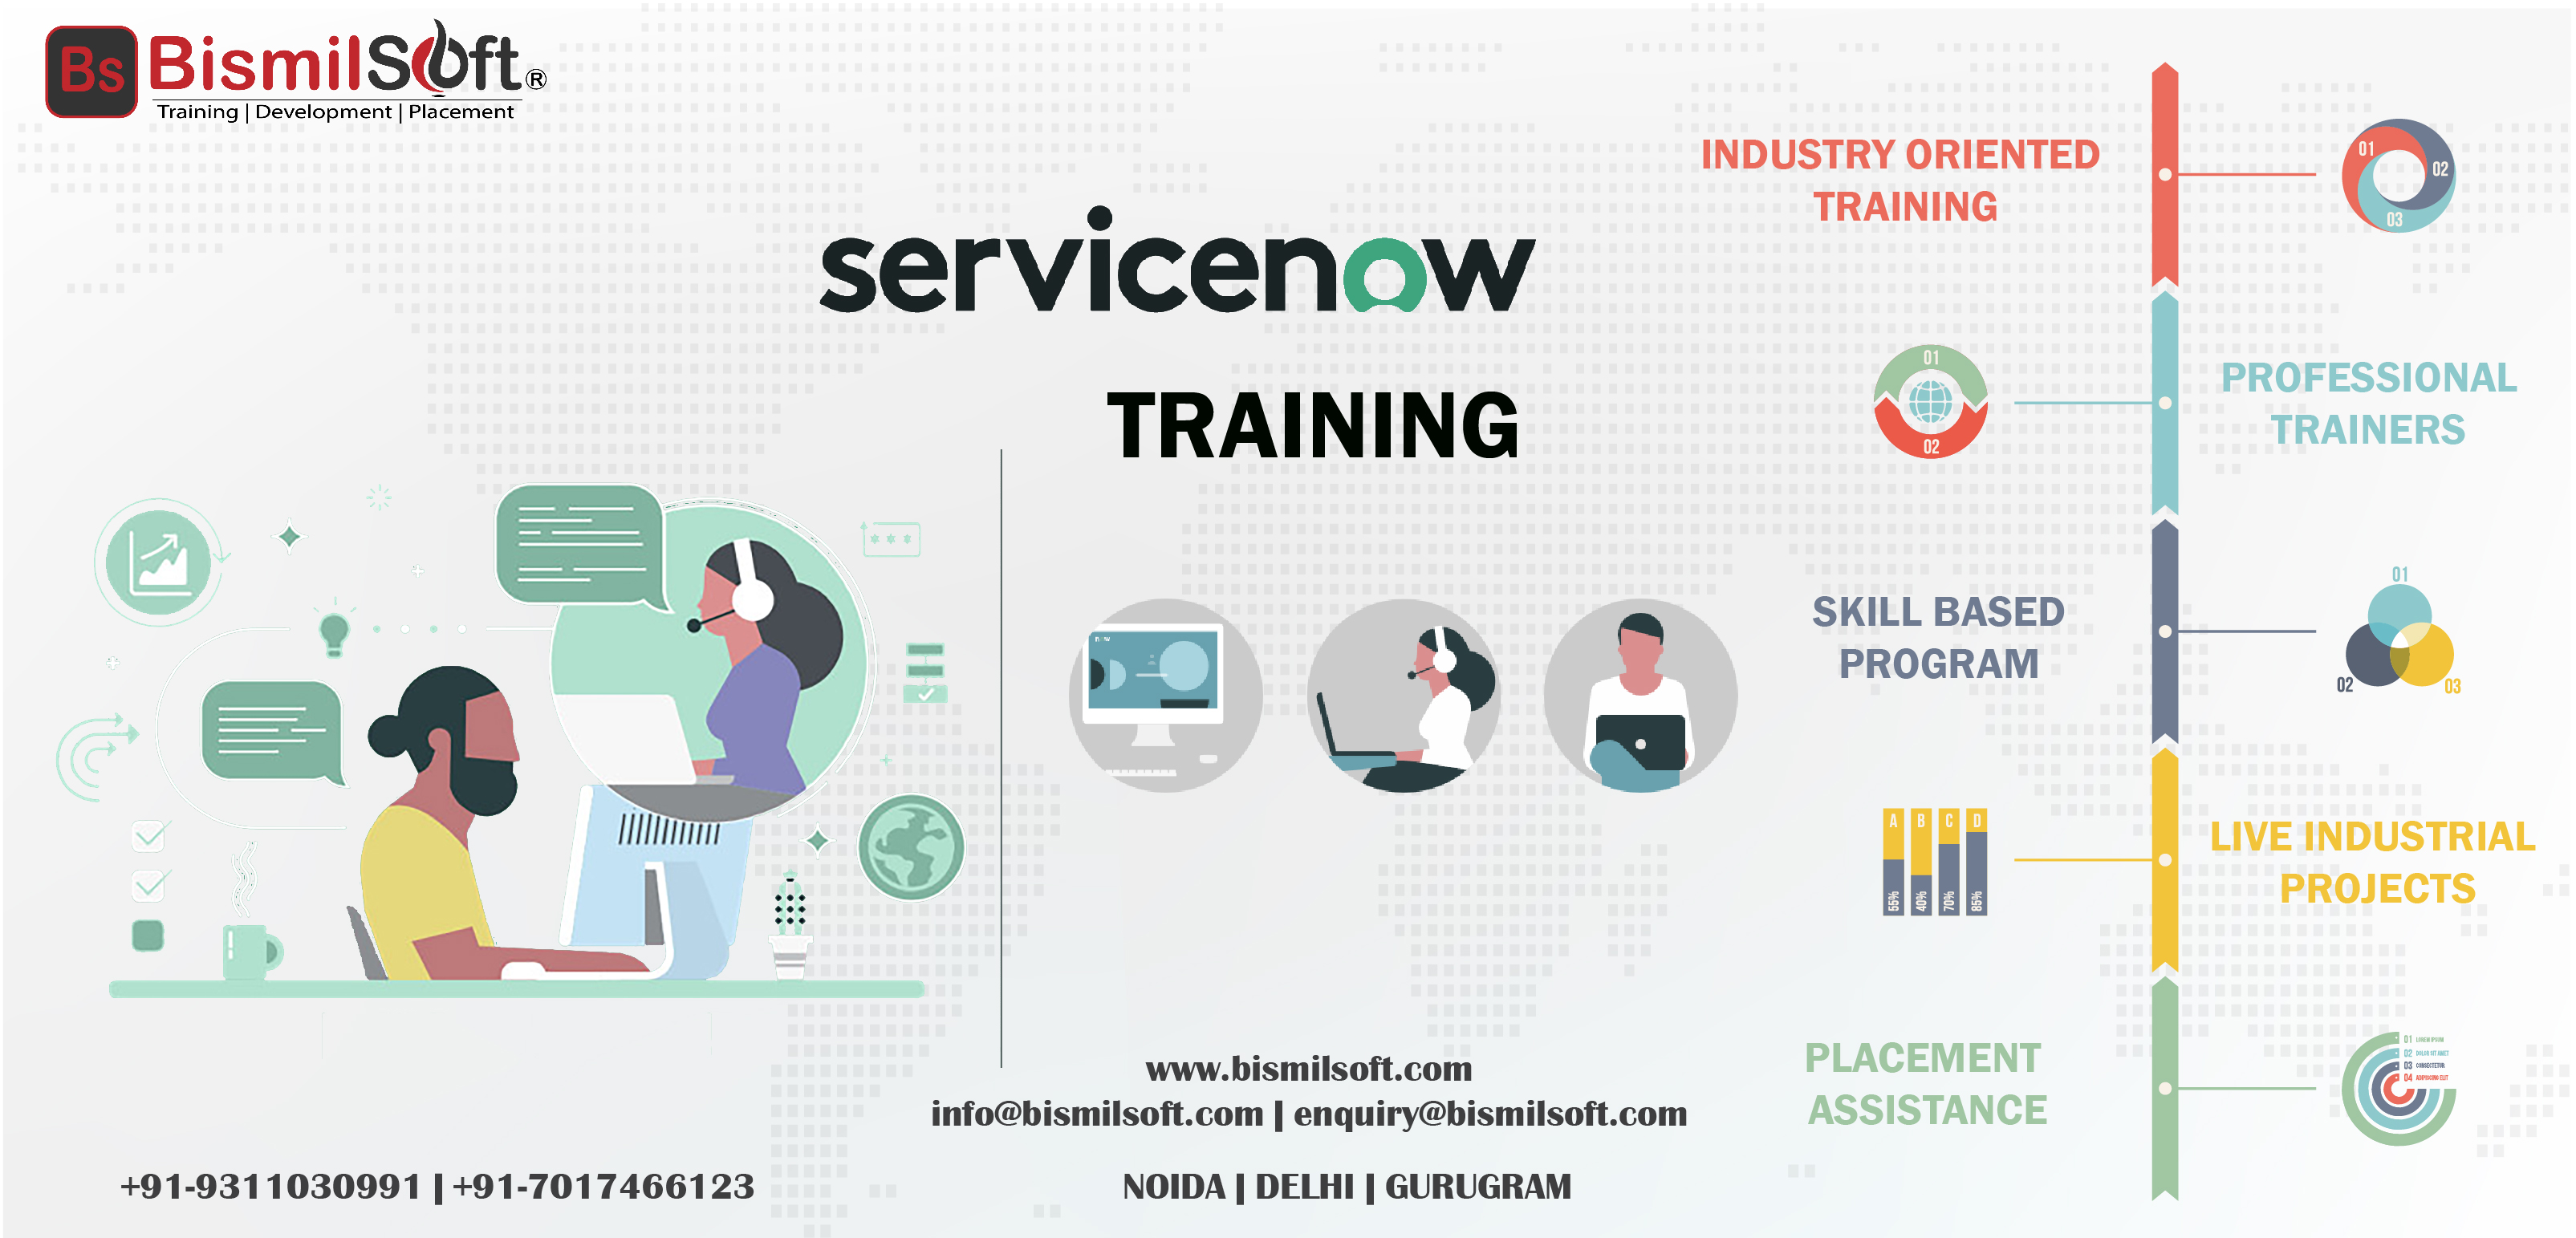 What Is Best Way To Grow Skills With ServiceNow?